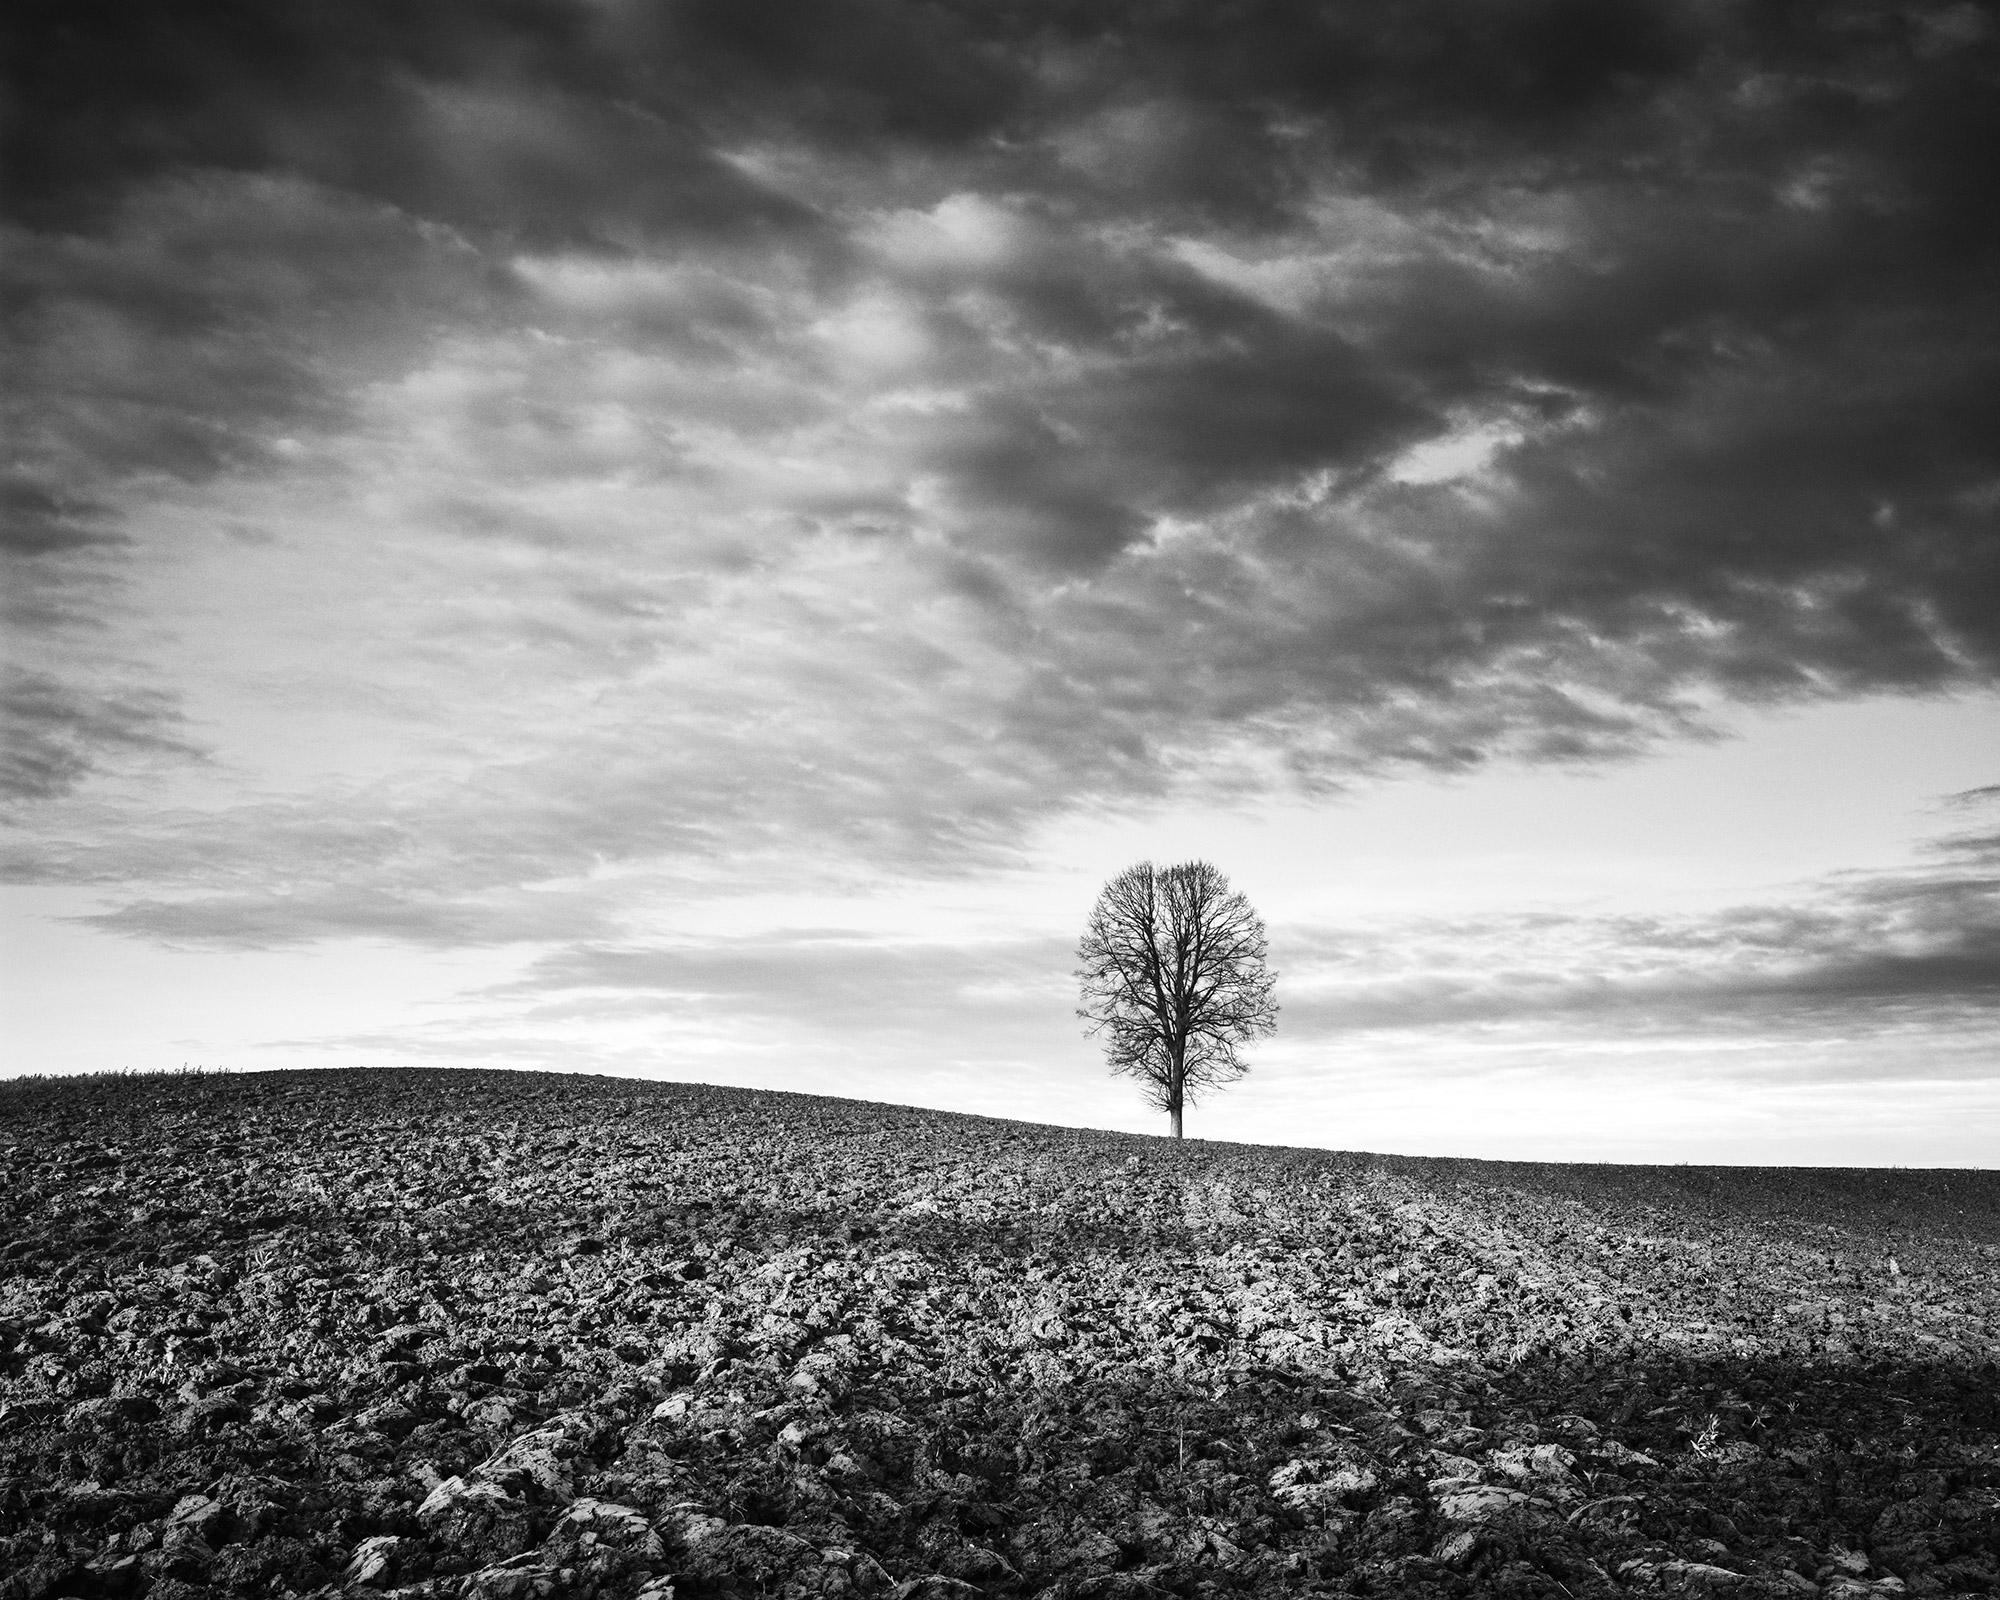 Gerald Berghammer Landscape Photograph - Lonely Tree, Storm, Field, black and white fine art landscape photography print